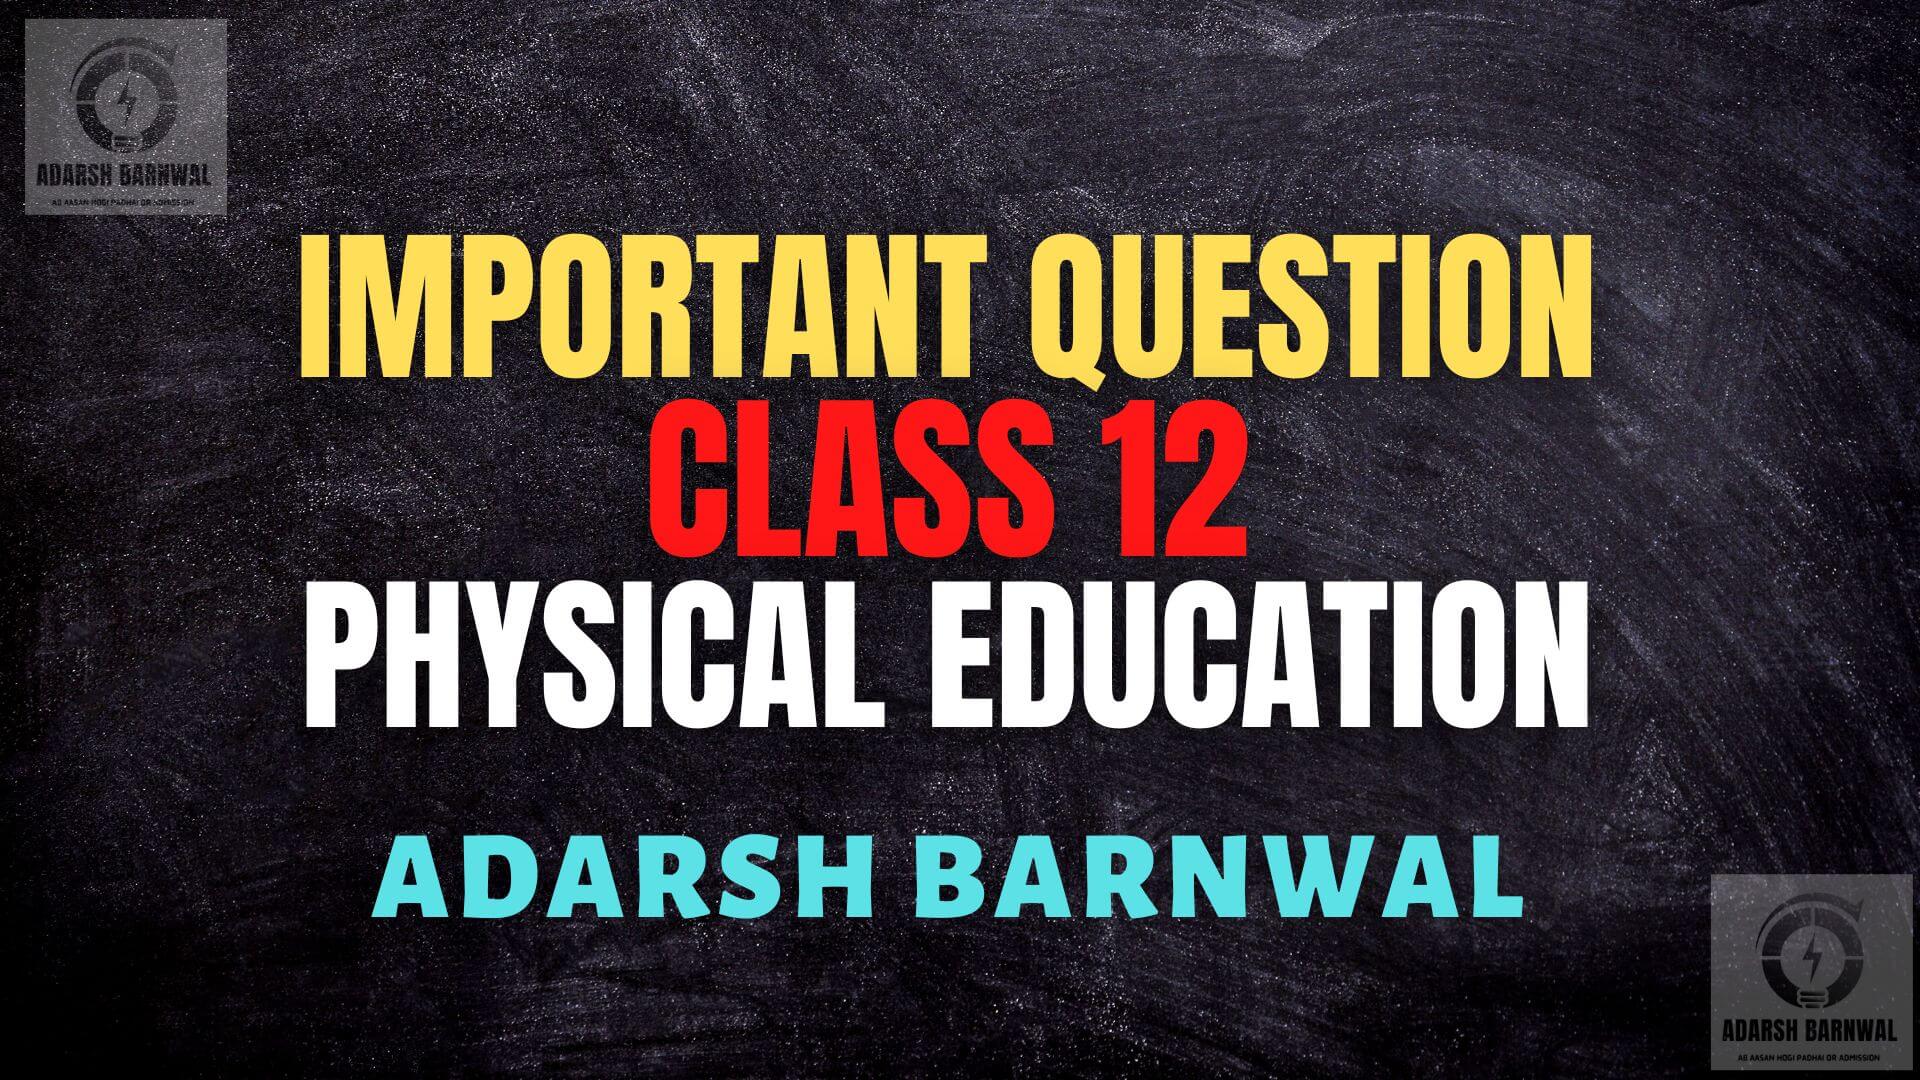 Class 12 Physical Education Most Important questions By Adarsh Barnwal